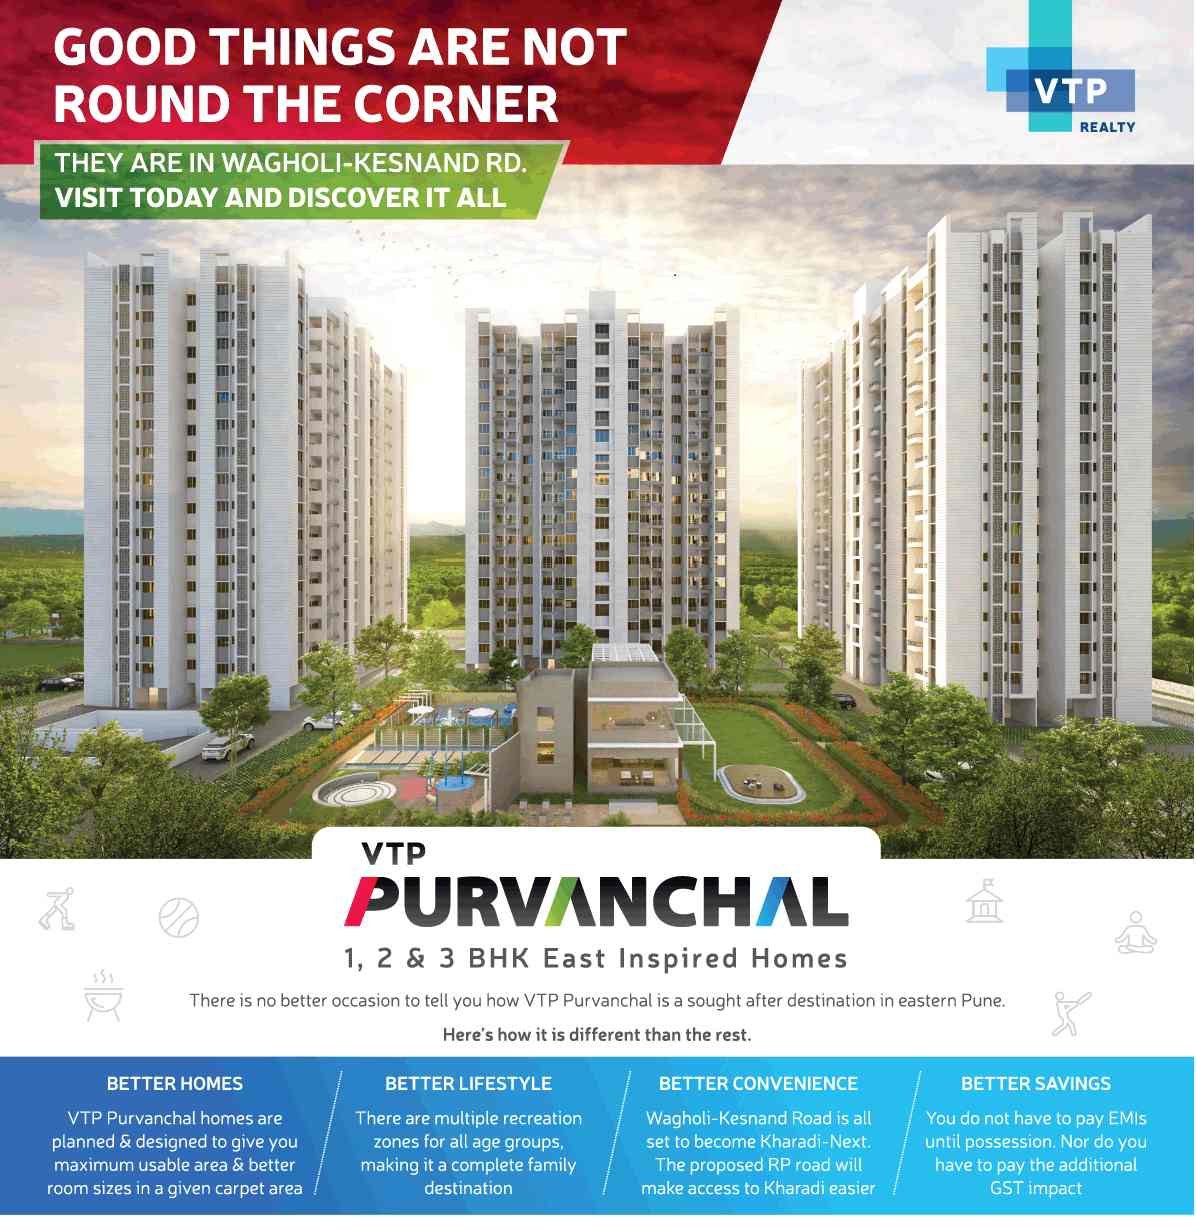 Live in east inspired homes at VTP Purvanchal in Pune Update